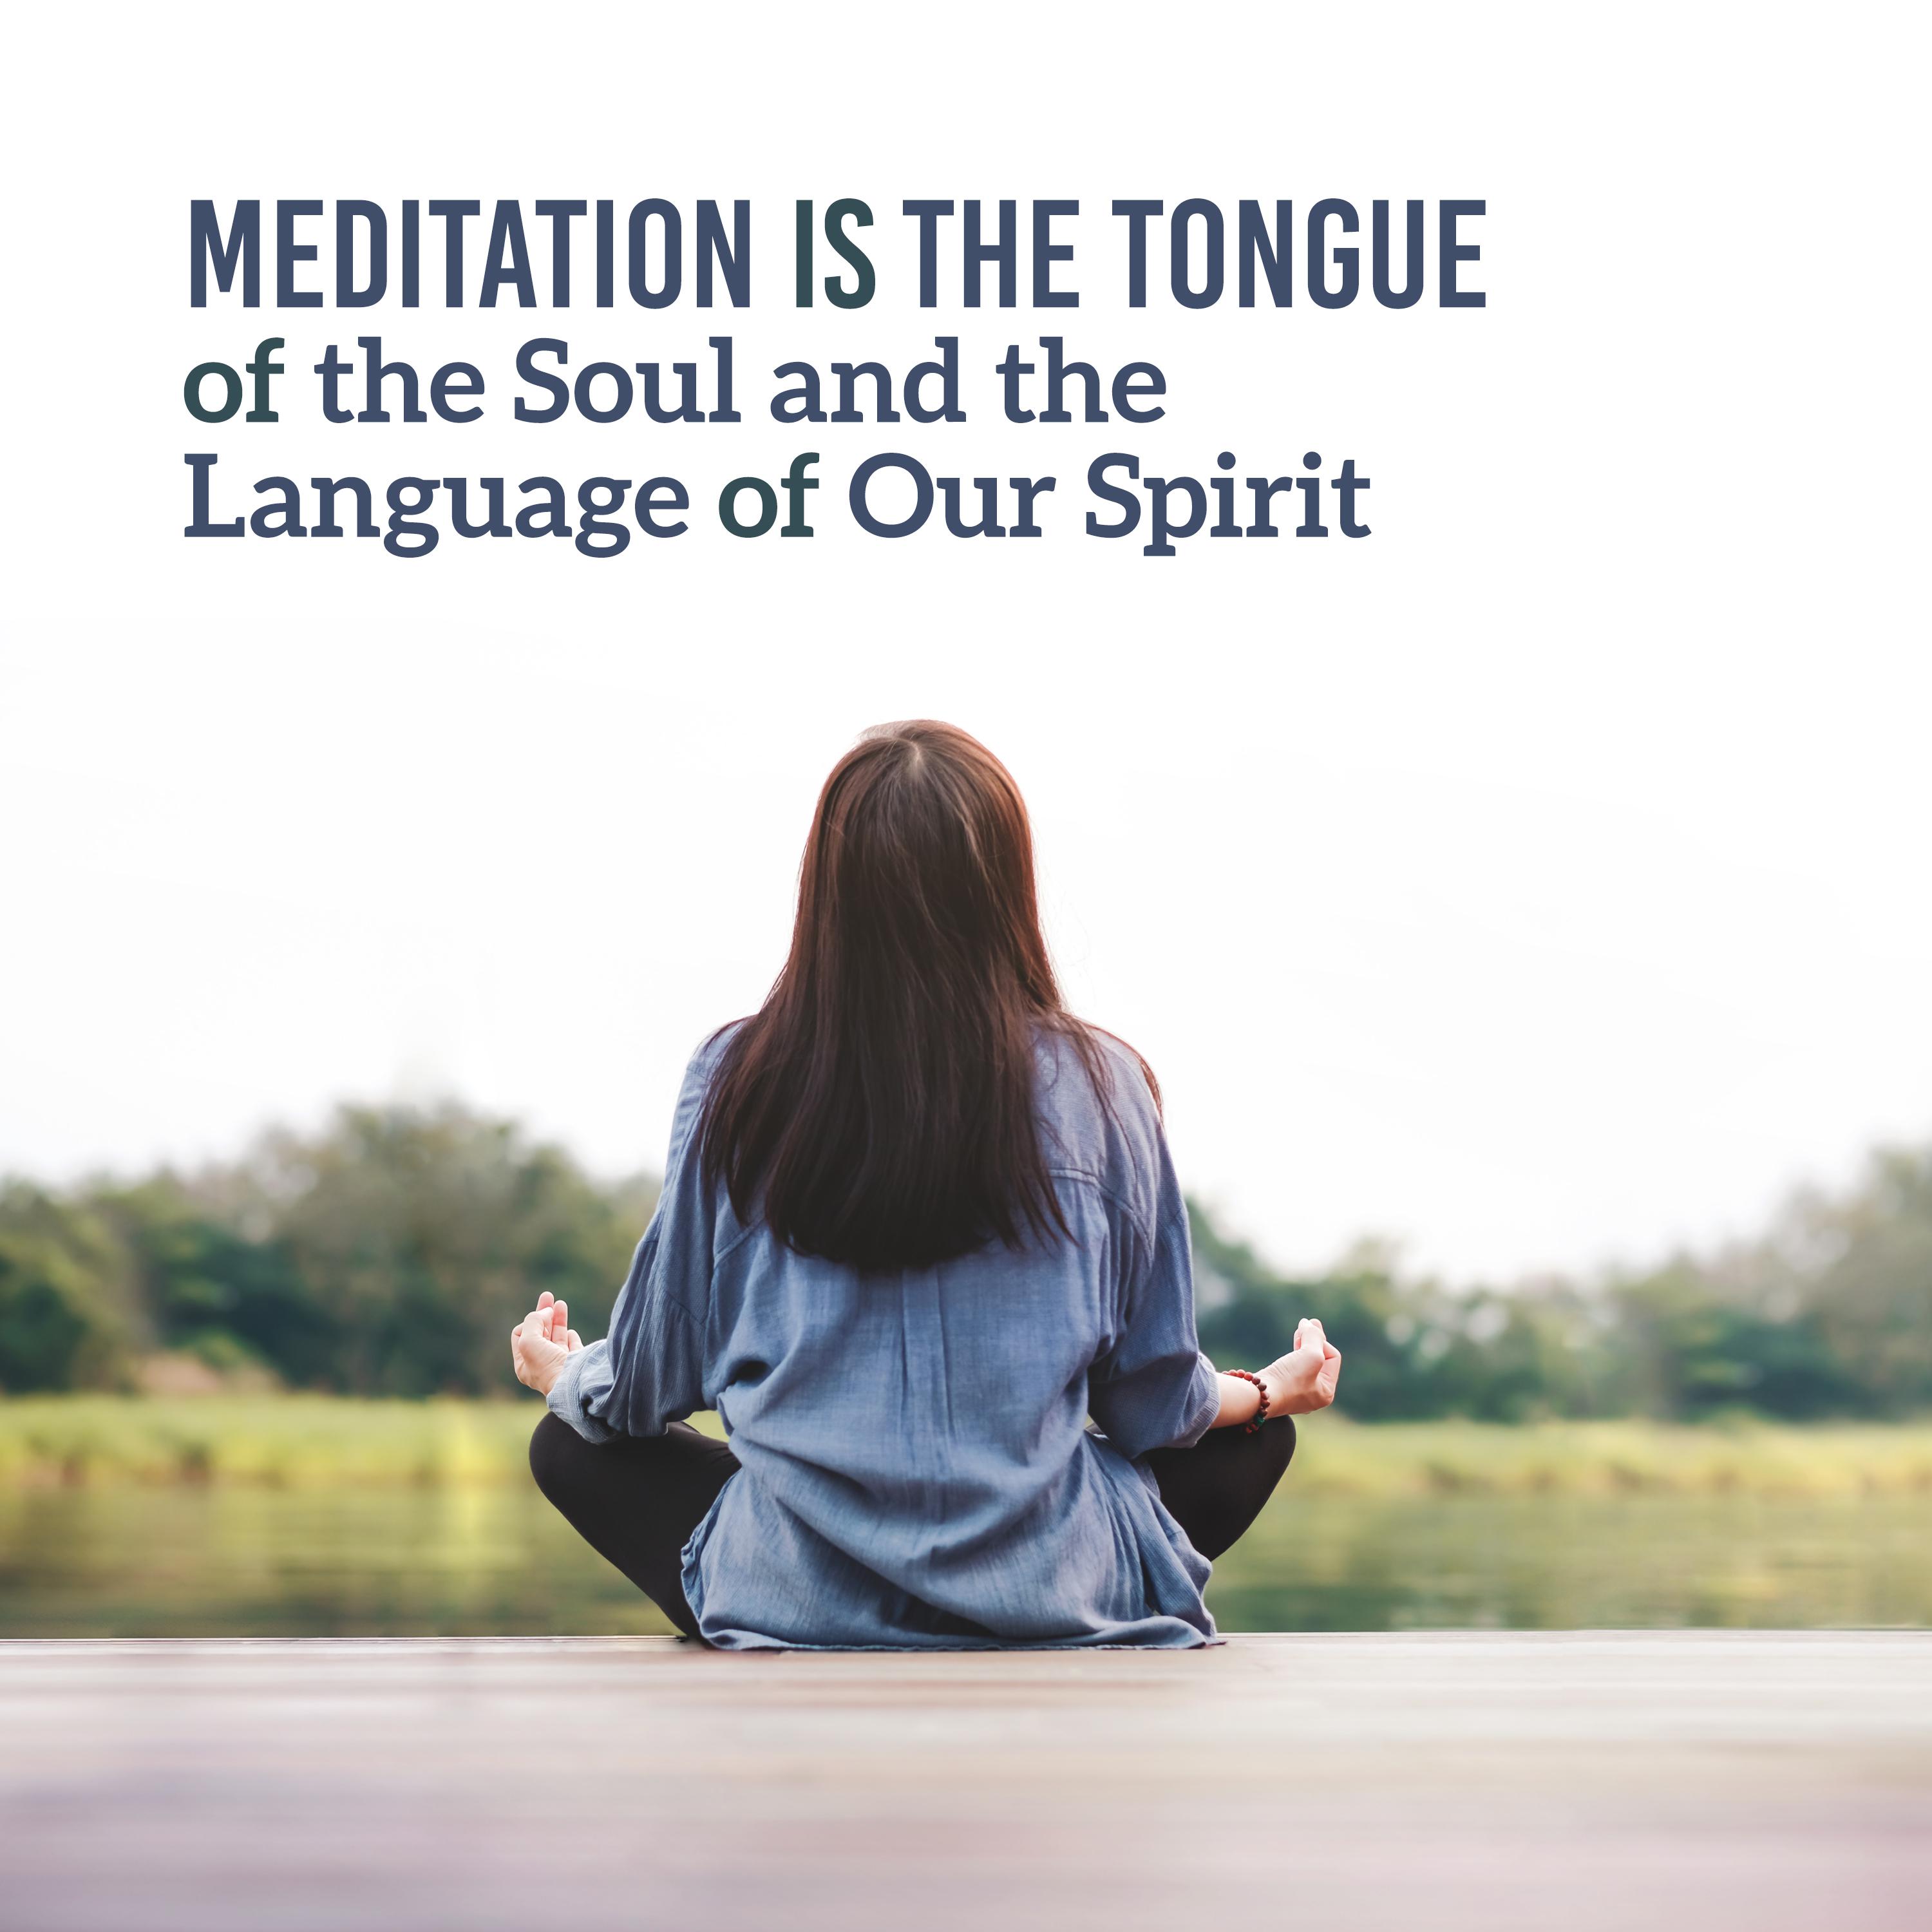 Meditation is the Tongue of the Soul and the Language of Our Spirit